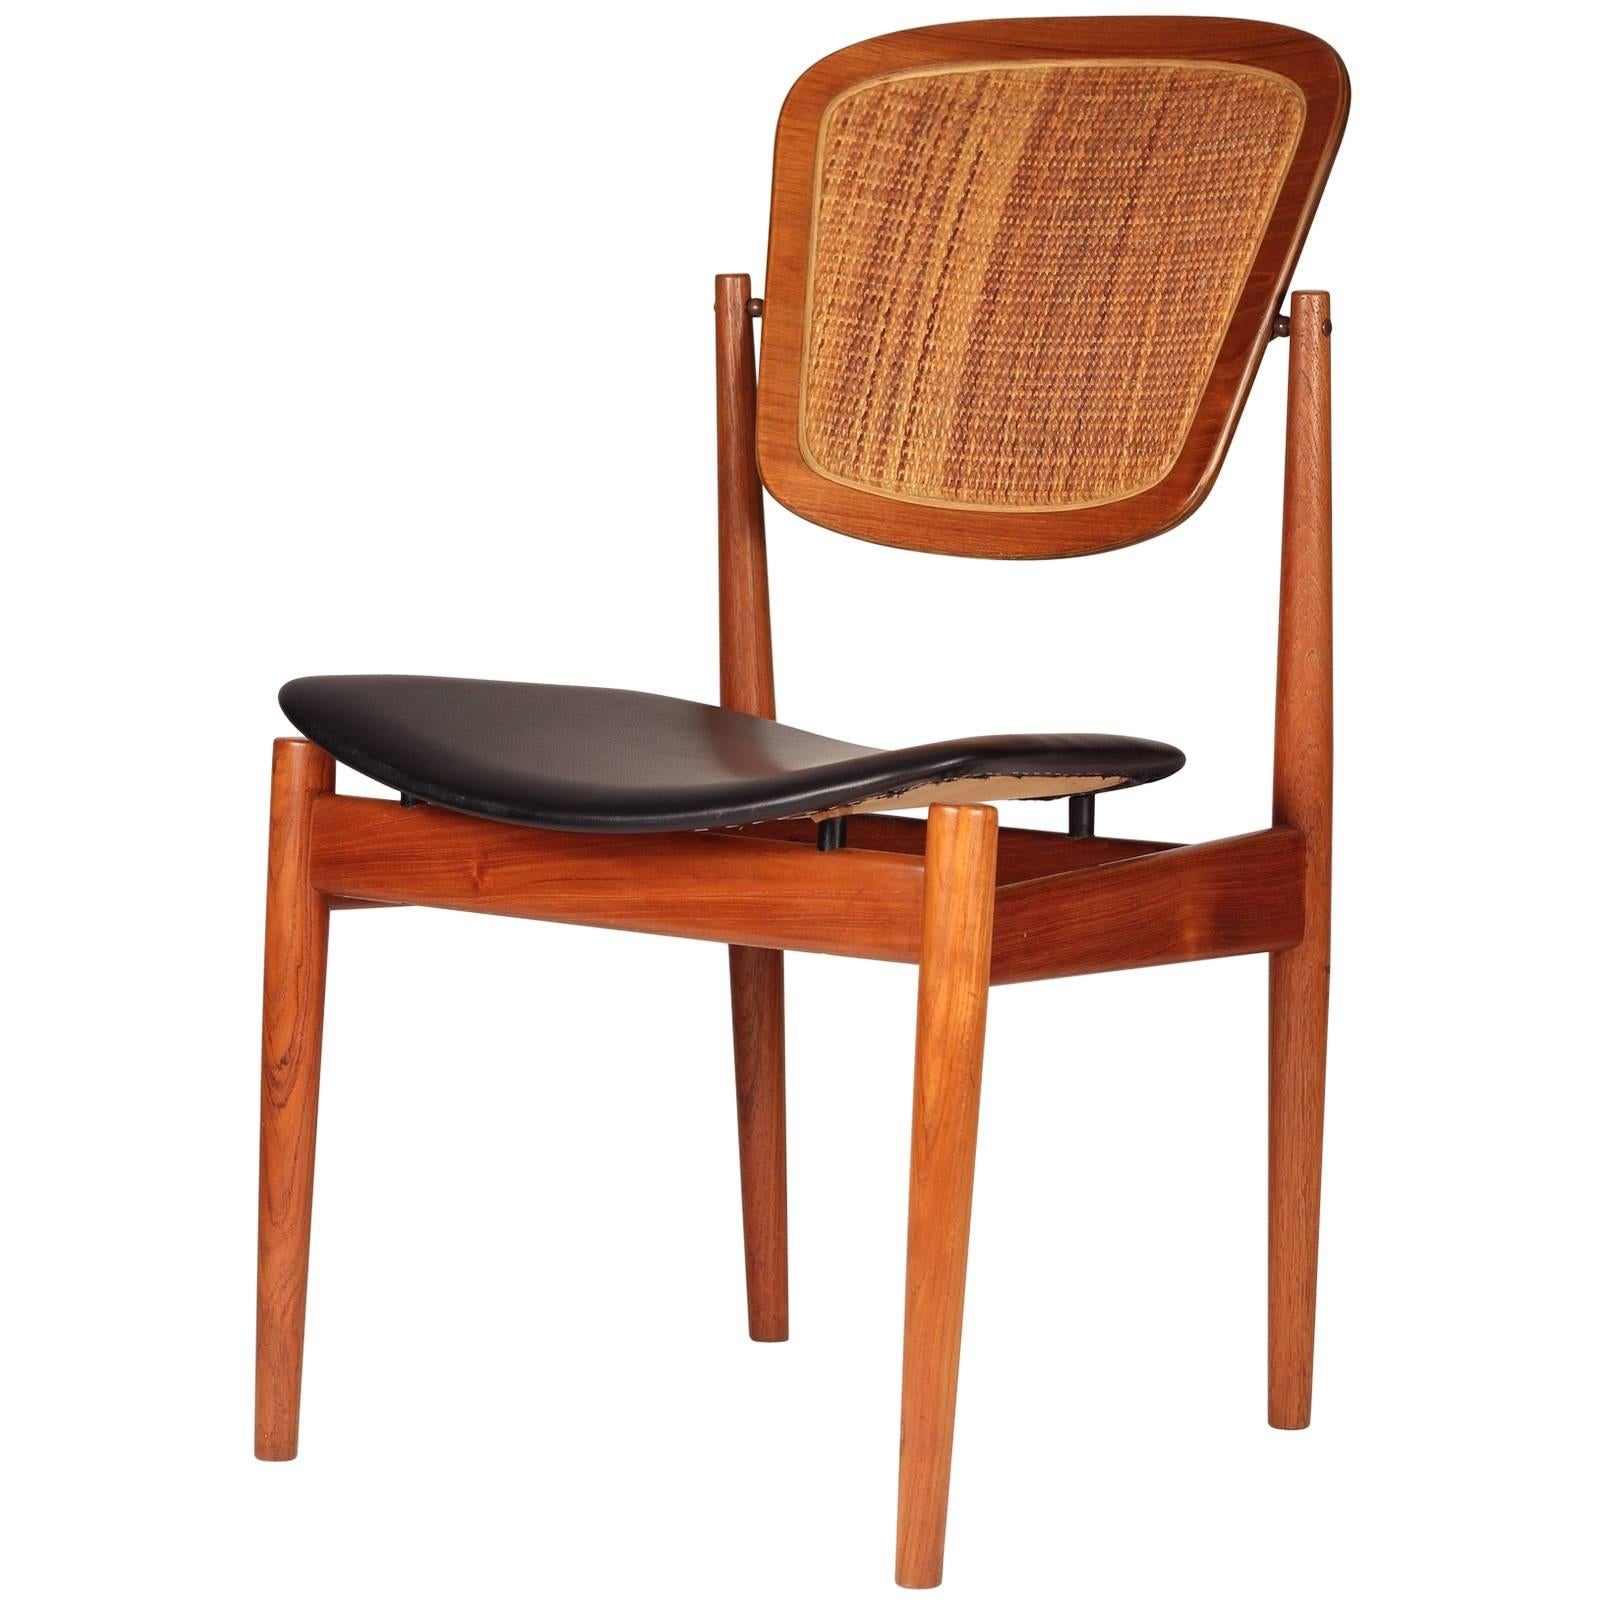 Danish Desk Chair by Arne Vodder in Teak, Cane and Black Leather